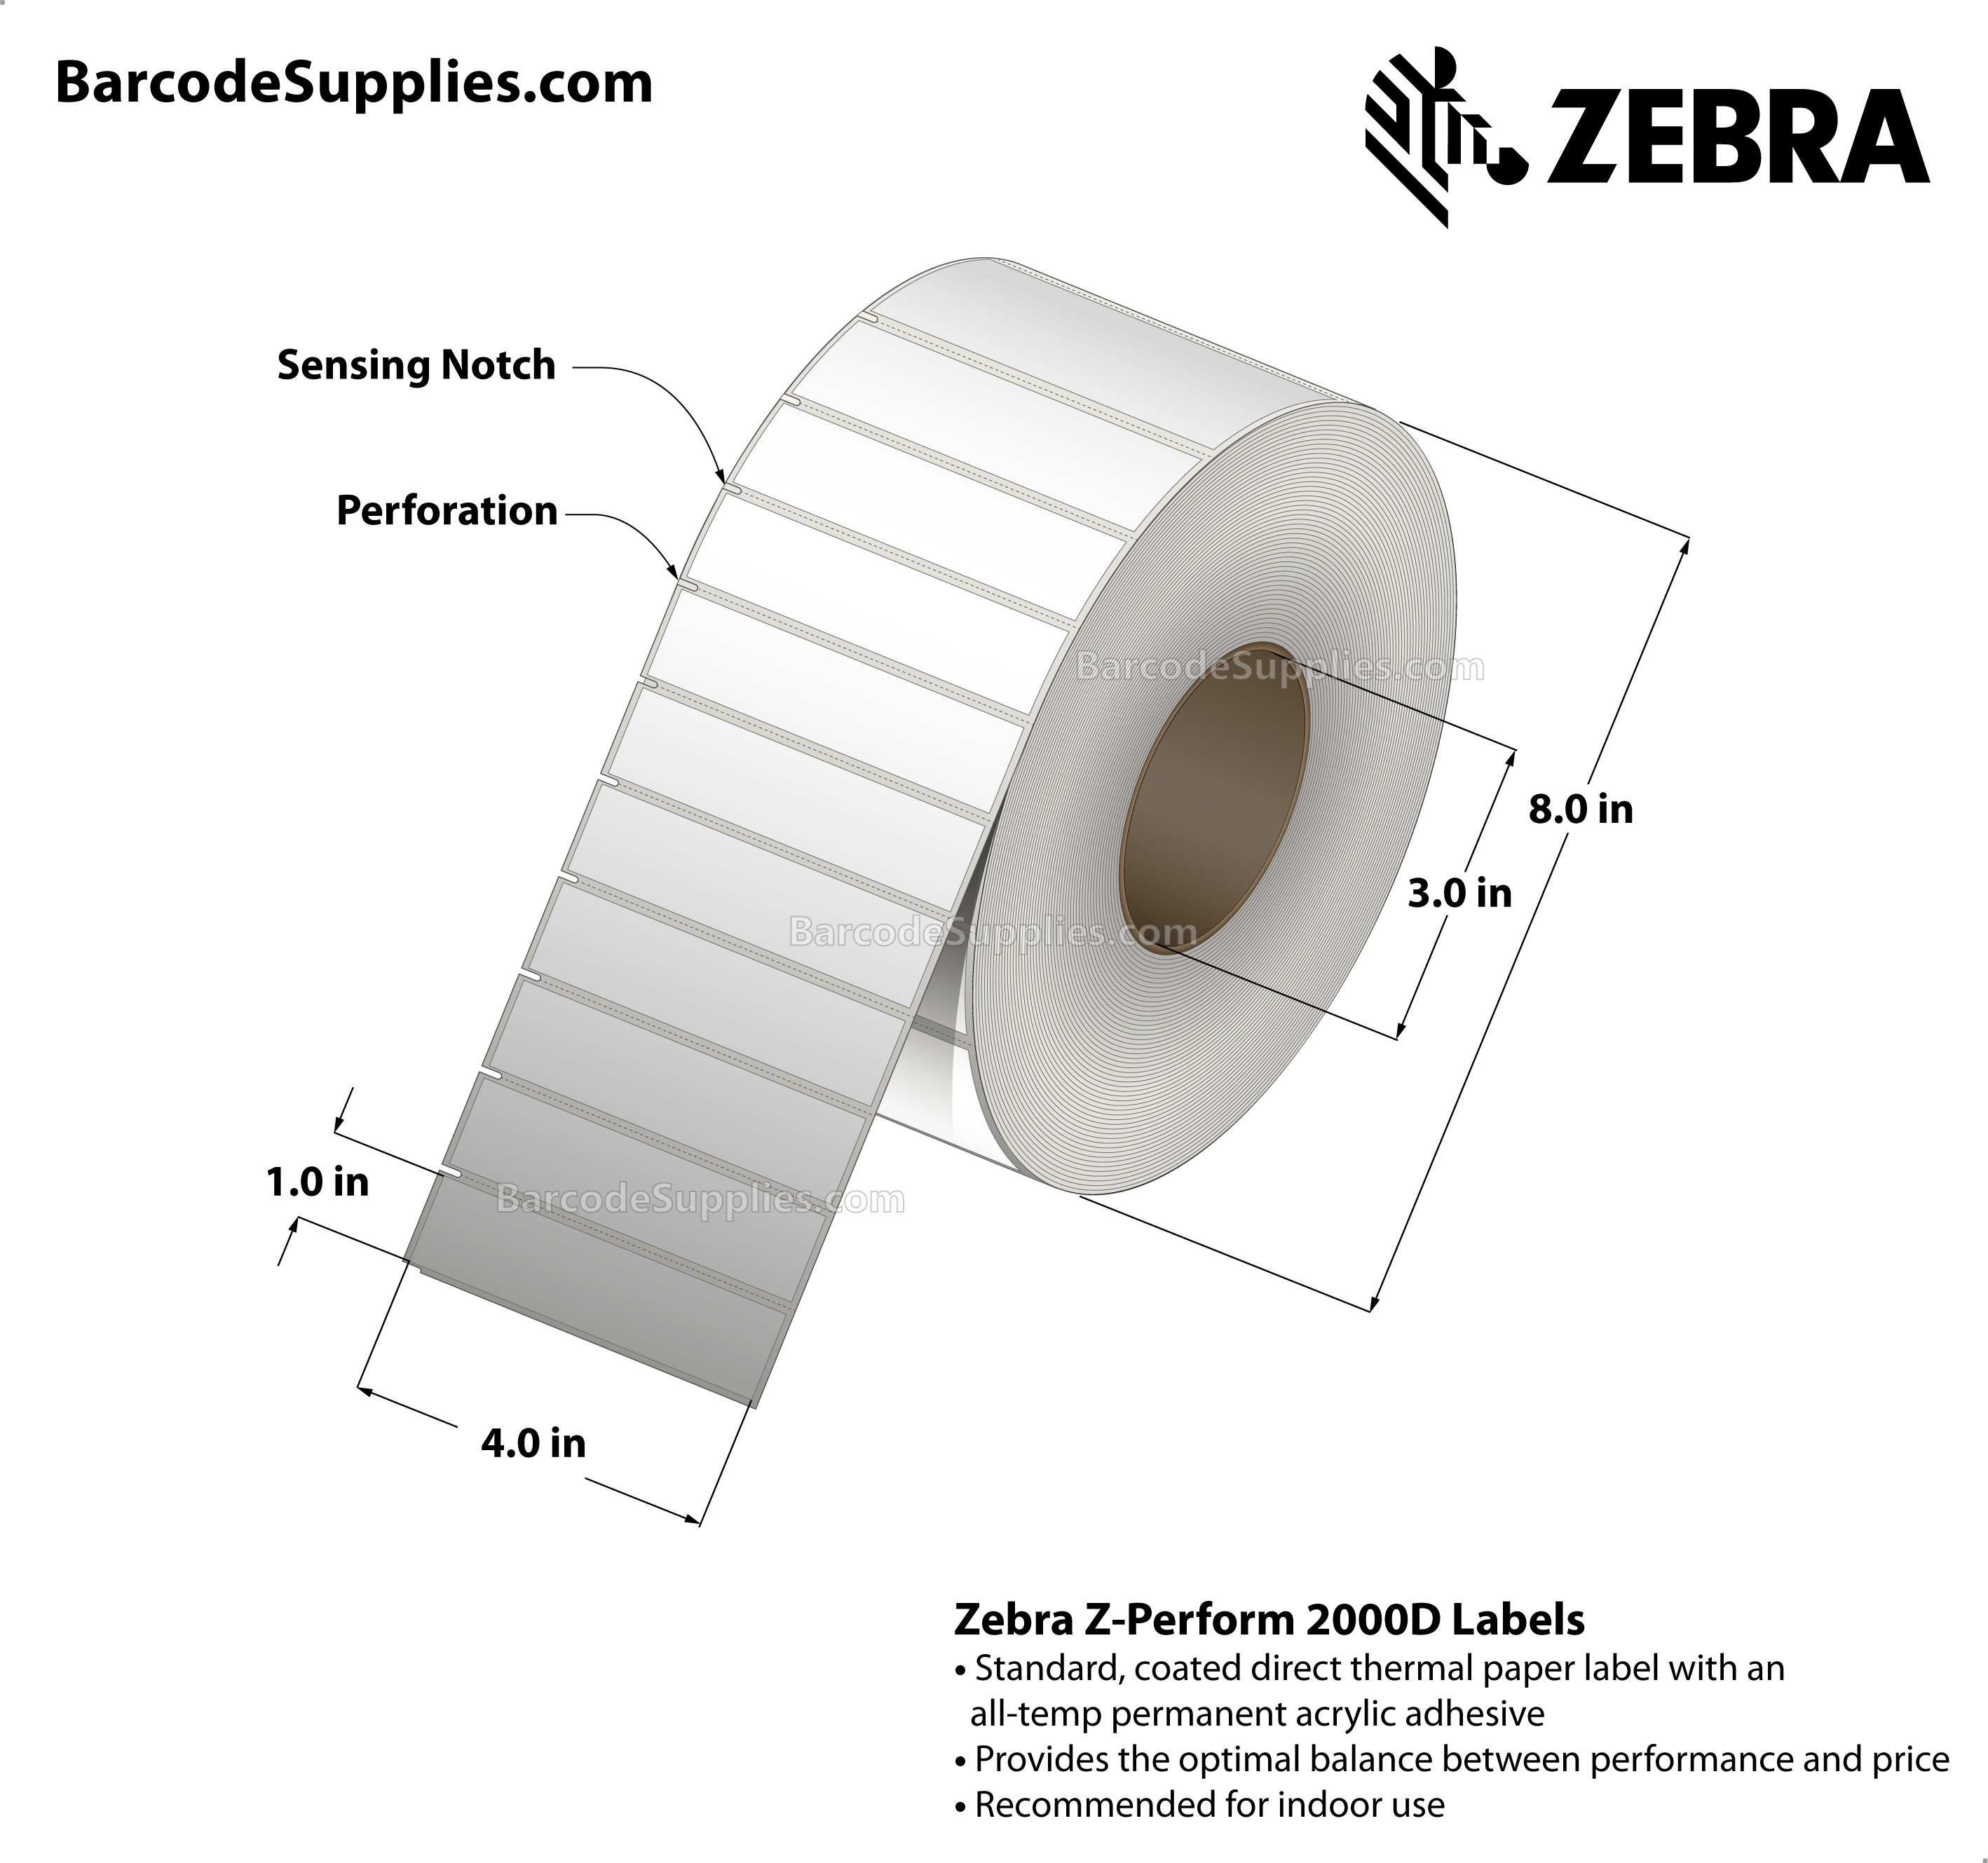 4 x 1 Direct Thermal White Z-Perform 2000D Labels With Permanent Adhesive - Label has square edges and side sensing notches on left side. - Perforated - 6000 Labels Per Roll - Carton Of 2 Rolls - 12000 Labels Total - MPN: 10025354